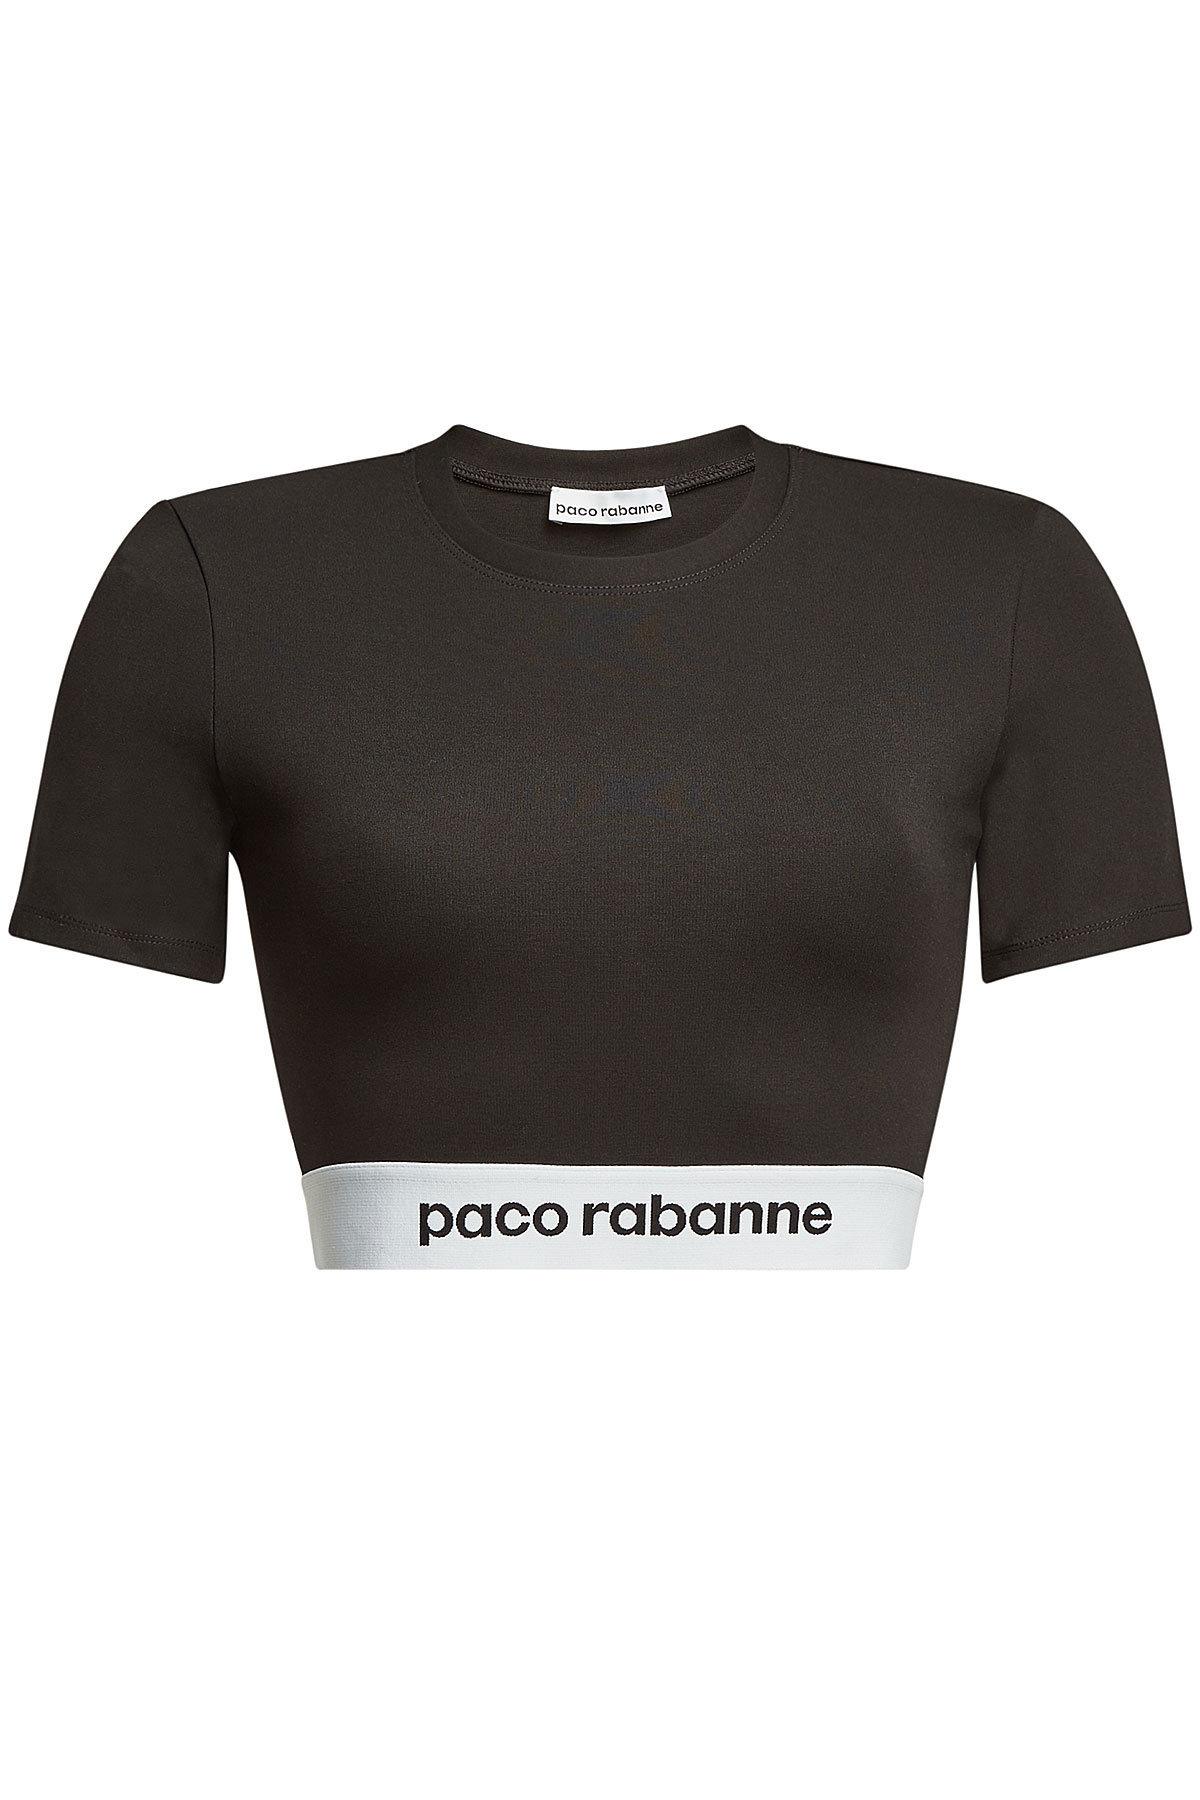 Lyst - Paco Rabanne Cropped T-shirt in Black